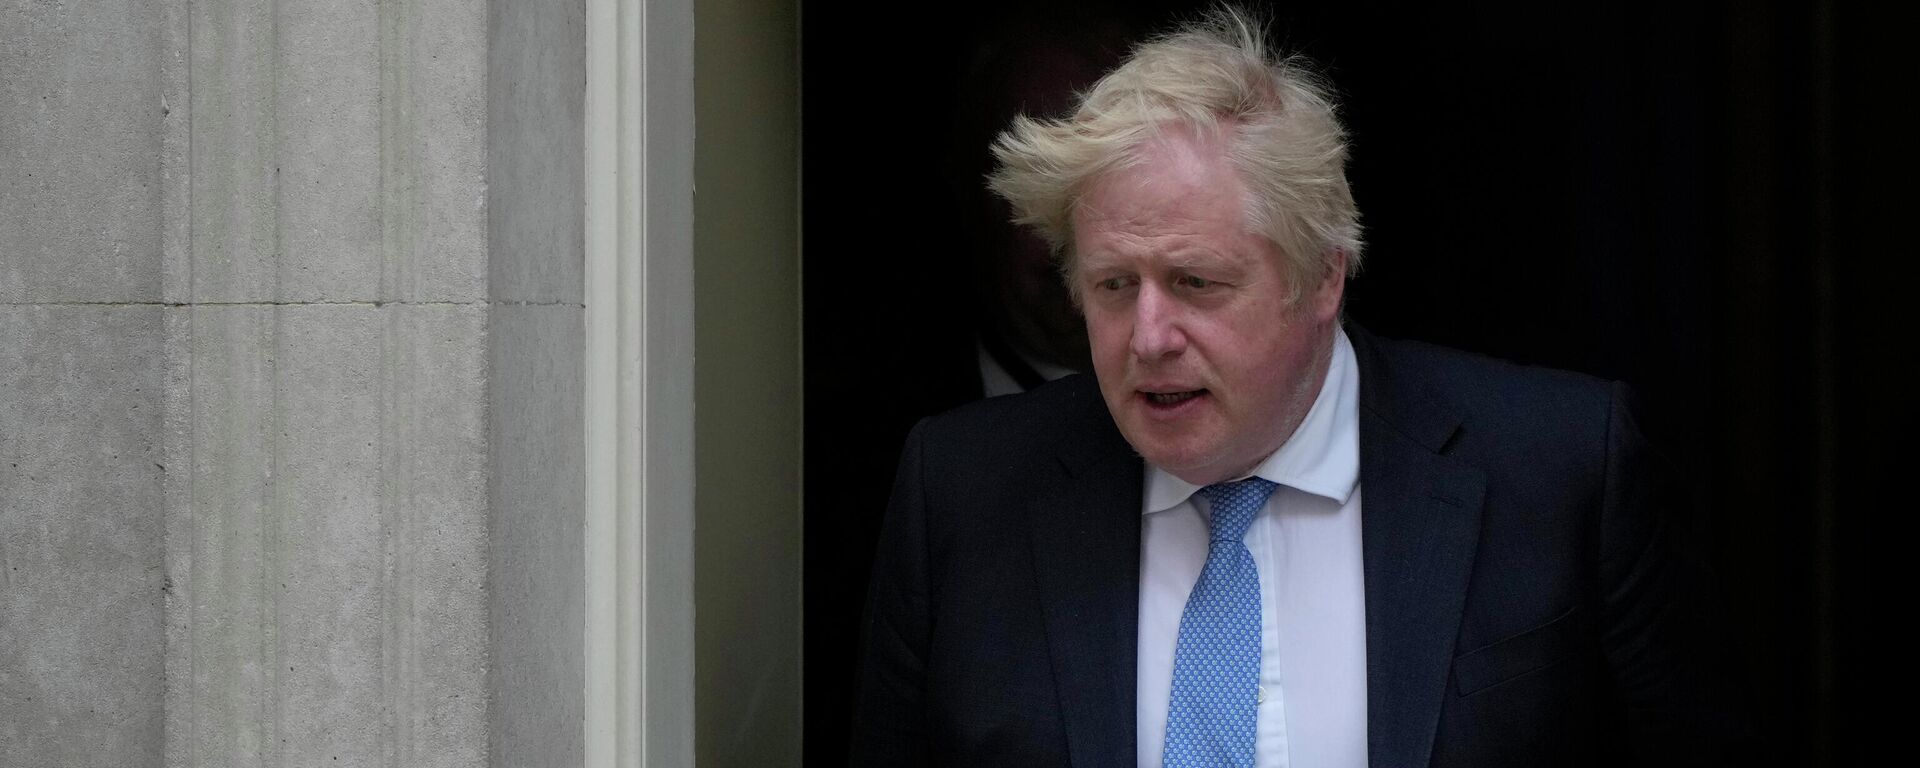 Britain's Prime Minister Boris Johnson leaves 10 Downing Street for the House of Commons to make a statement about Downing Street parties during the coronavirus lockdowns in London, Tuesday, April 19, 2022 - Sputnik International, 1920, 06.05.2022